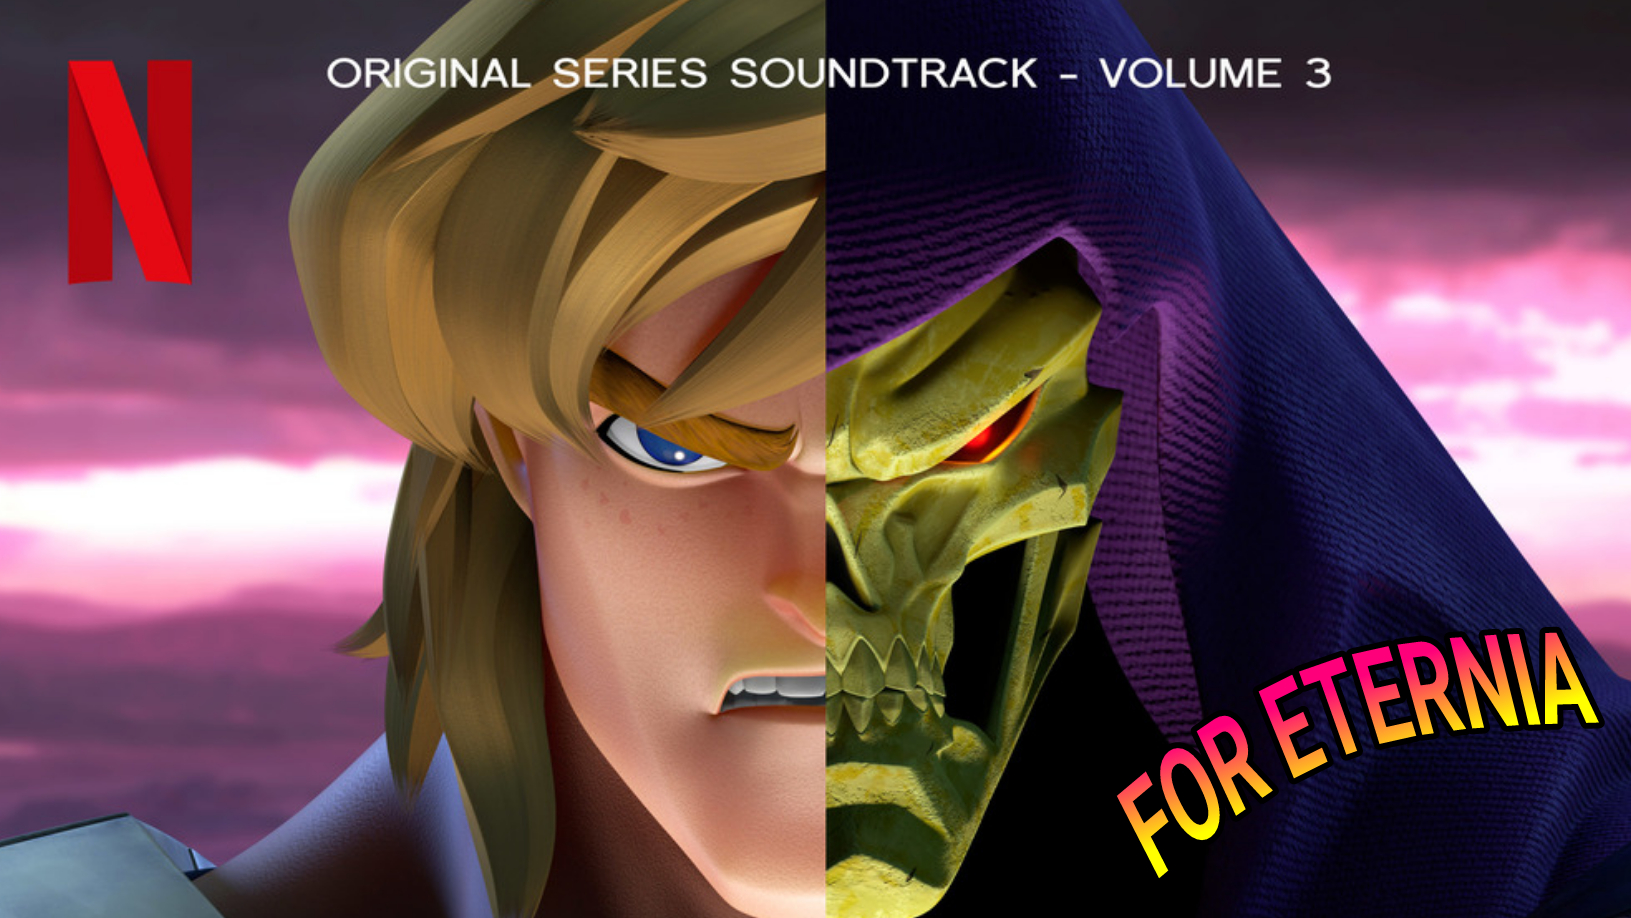 ”He-Man and the Masters of the Universe” Season 3 Soundtrack is now Available